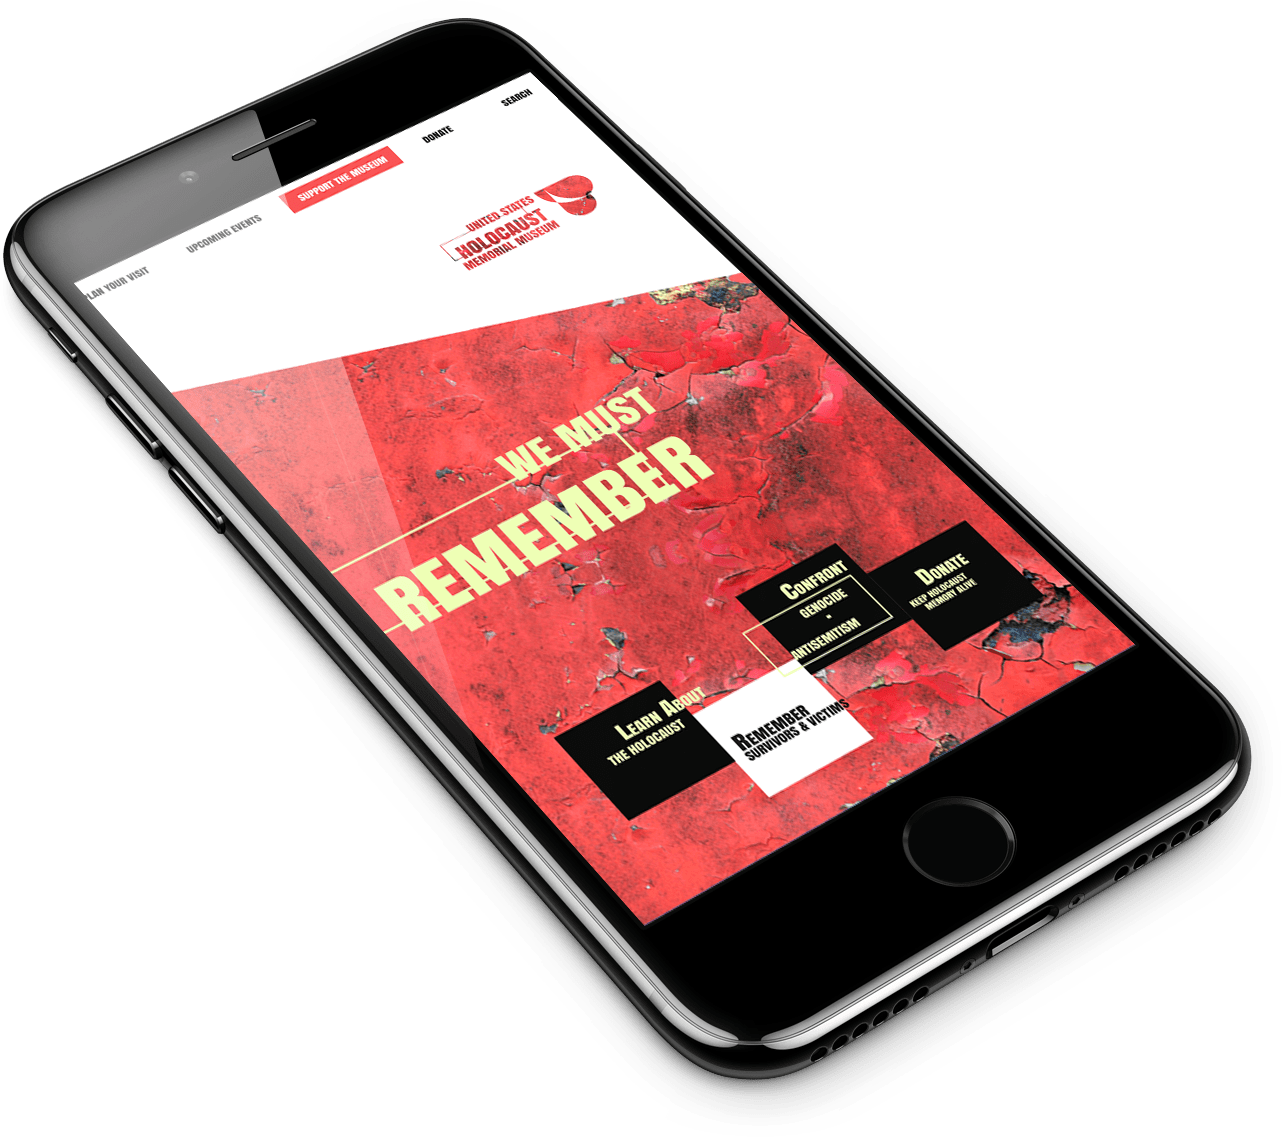 USHMM front website page design on iPhone 7